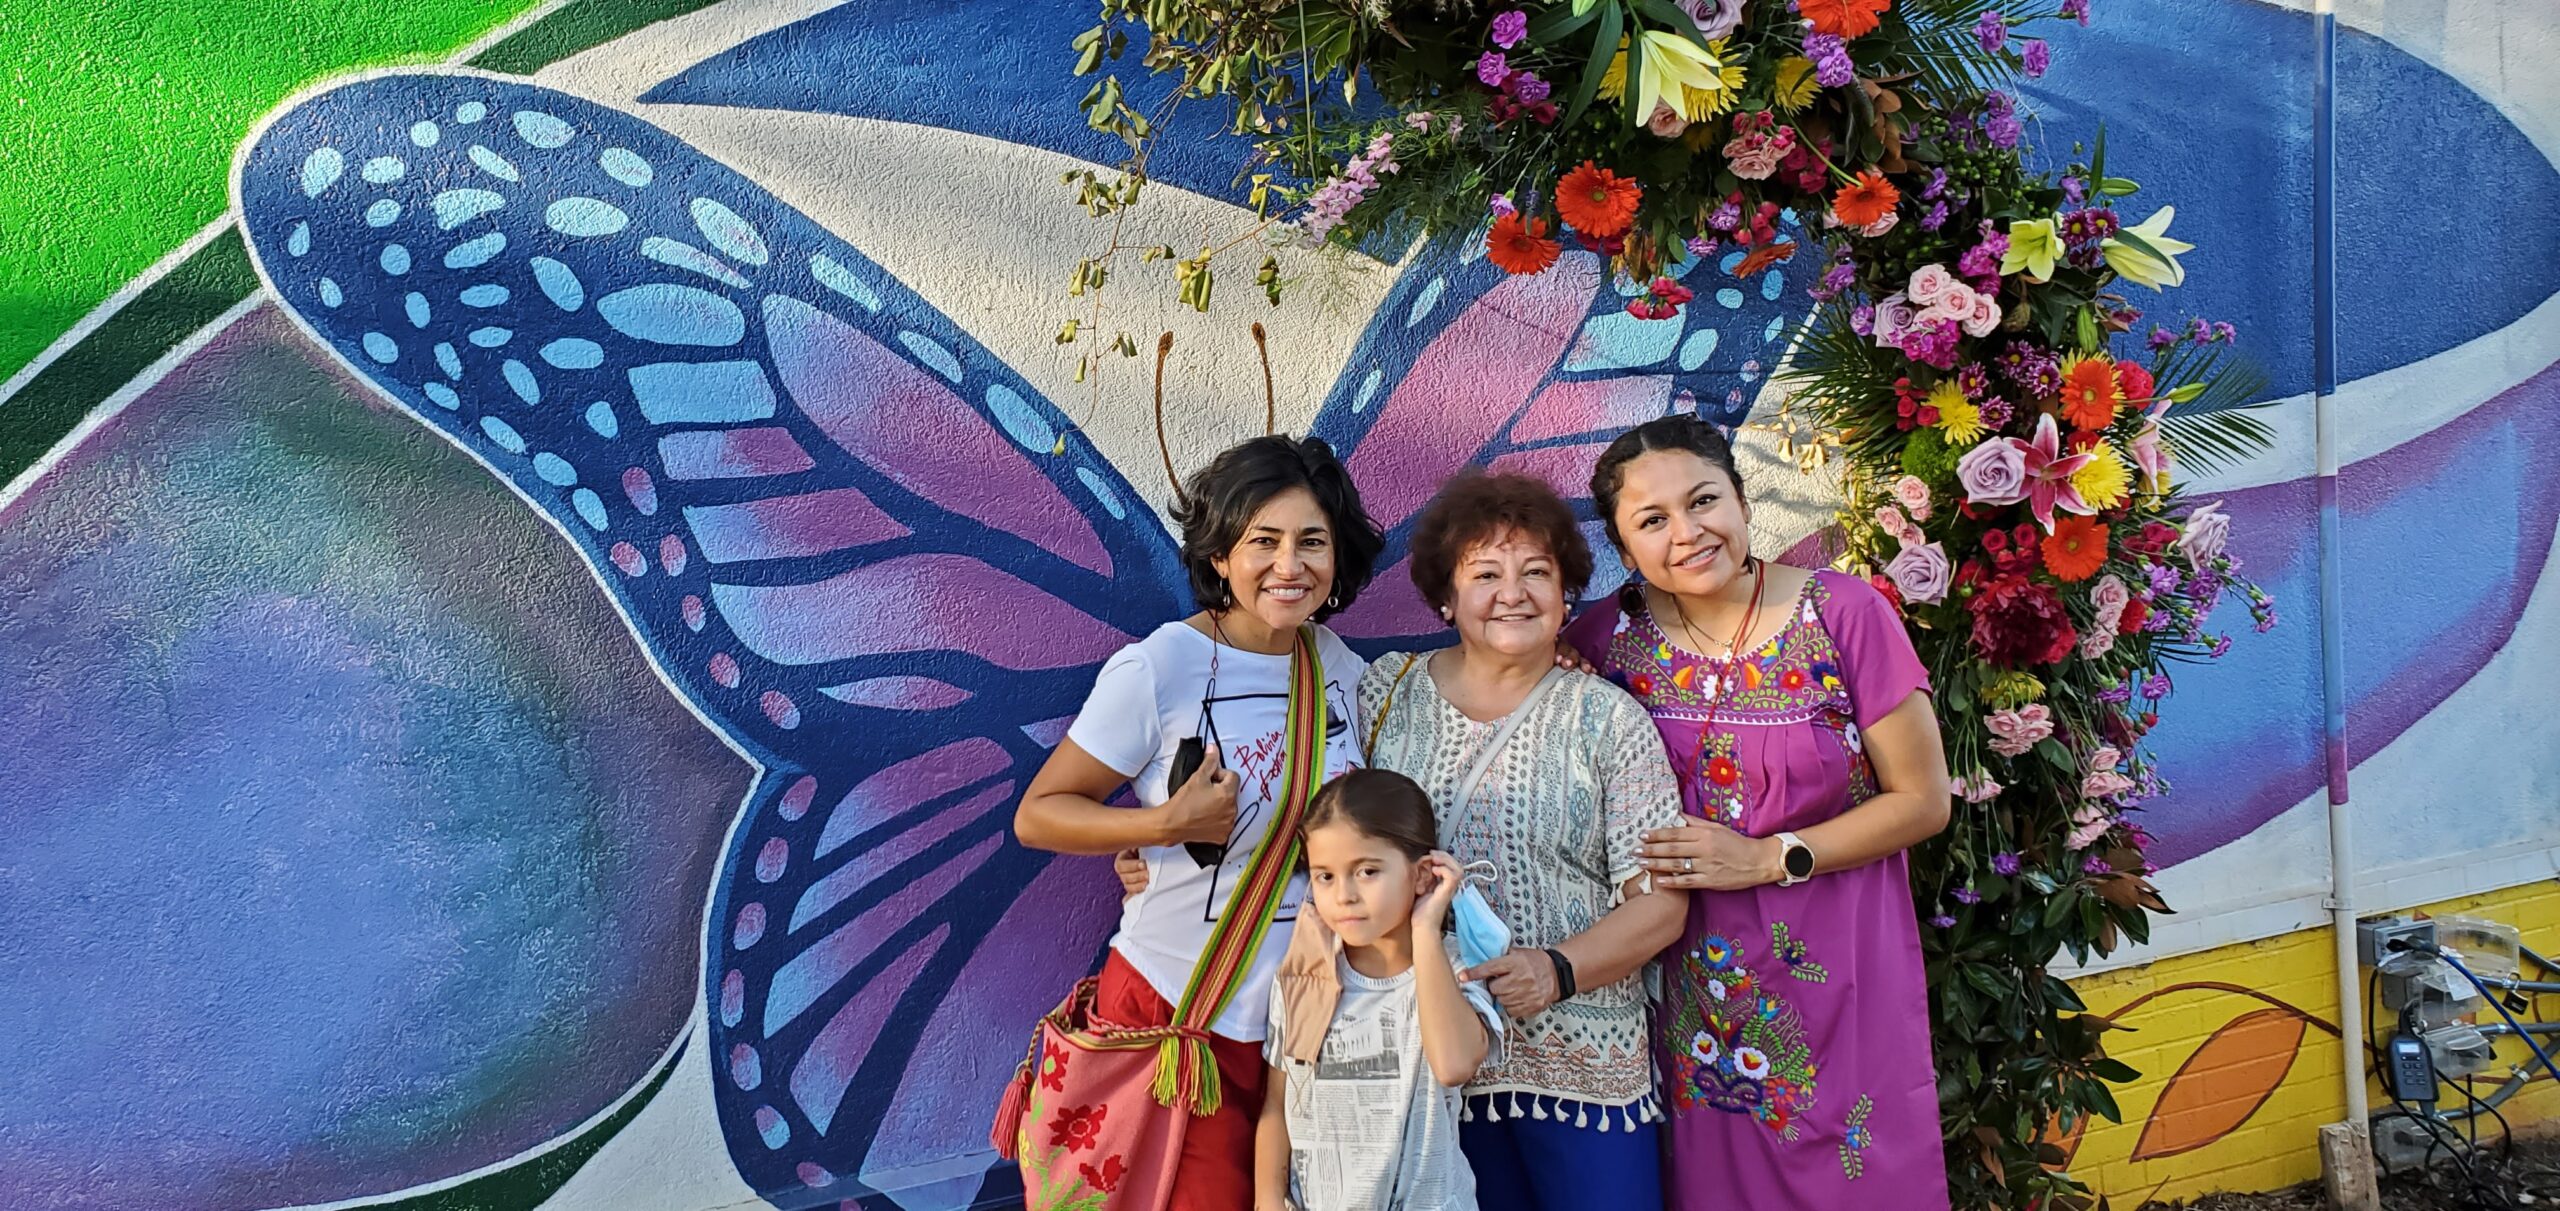 This year-end, give hope to a Latino familia